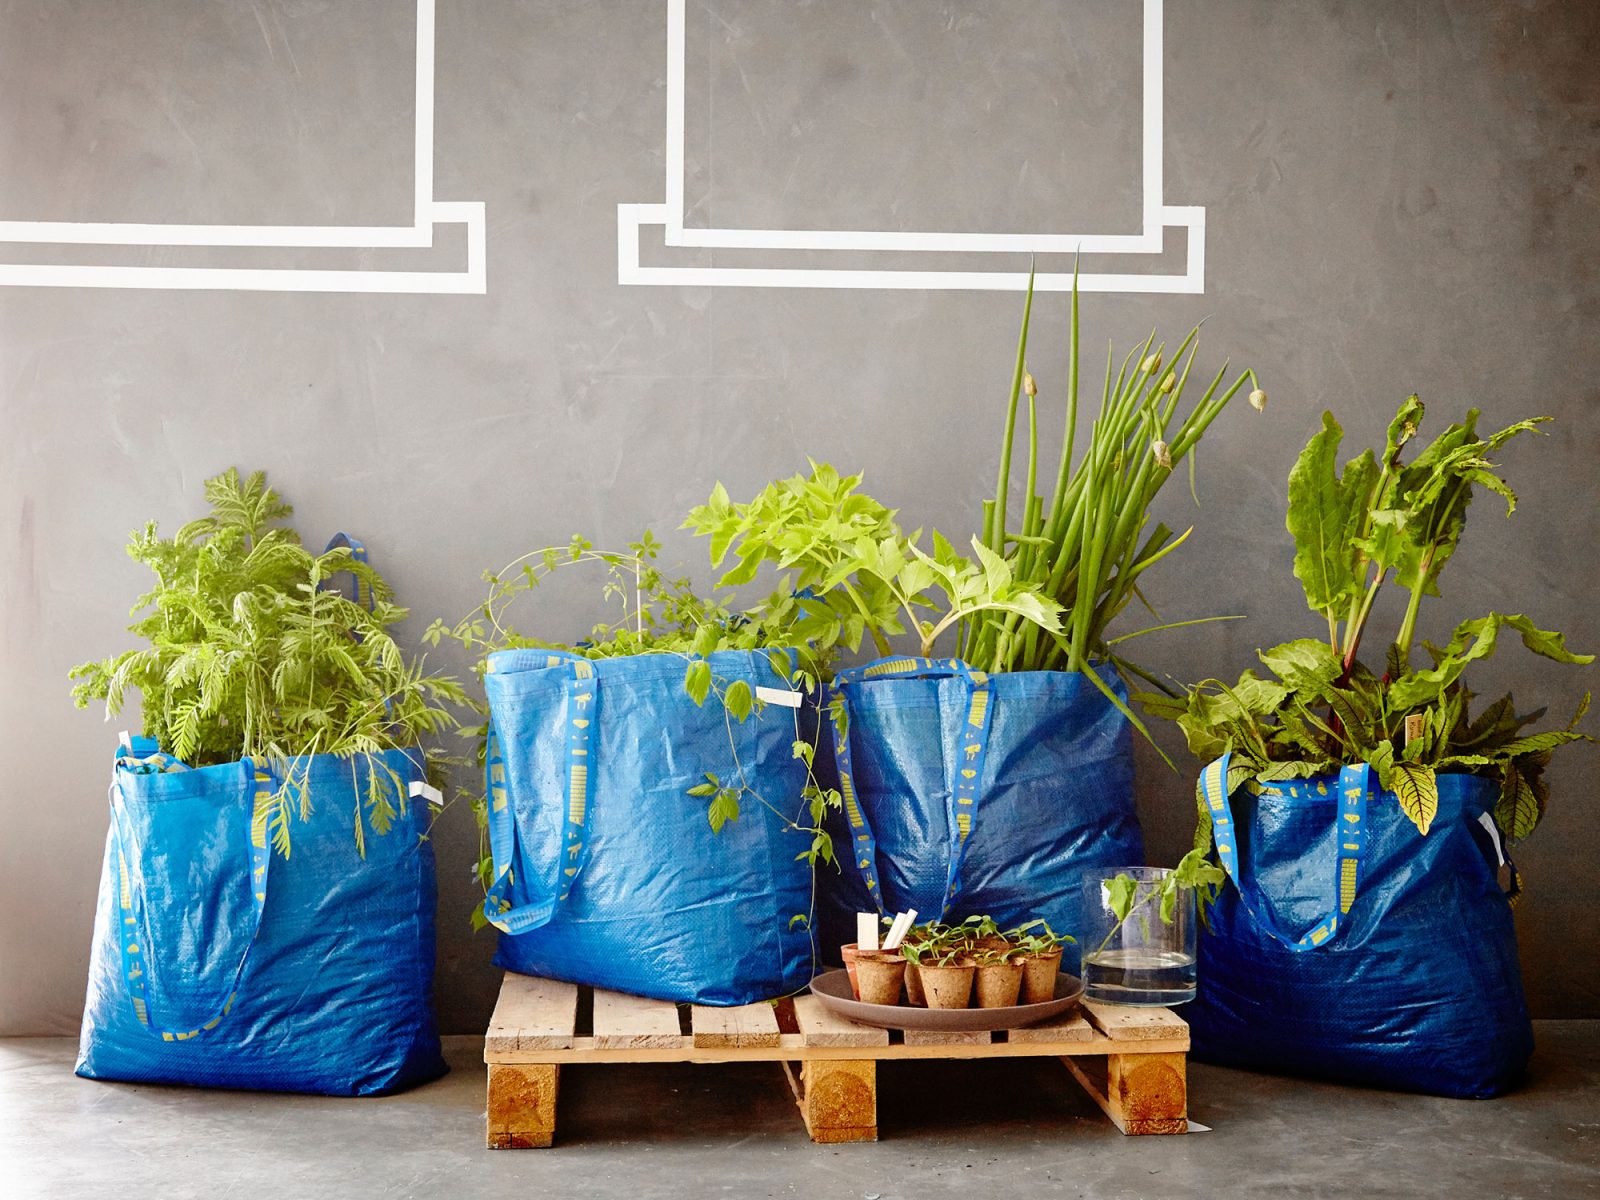 A line of big blue bags, FRAKTA, being used as planters for lush green plants.